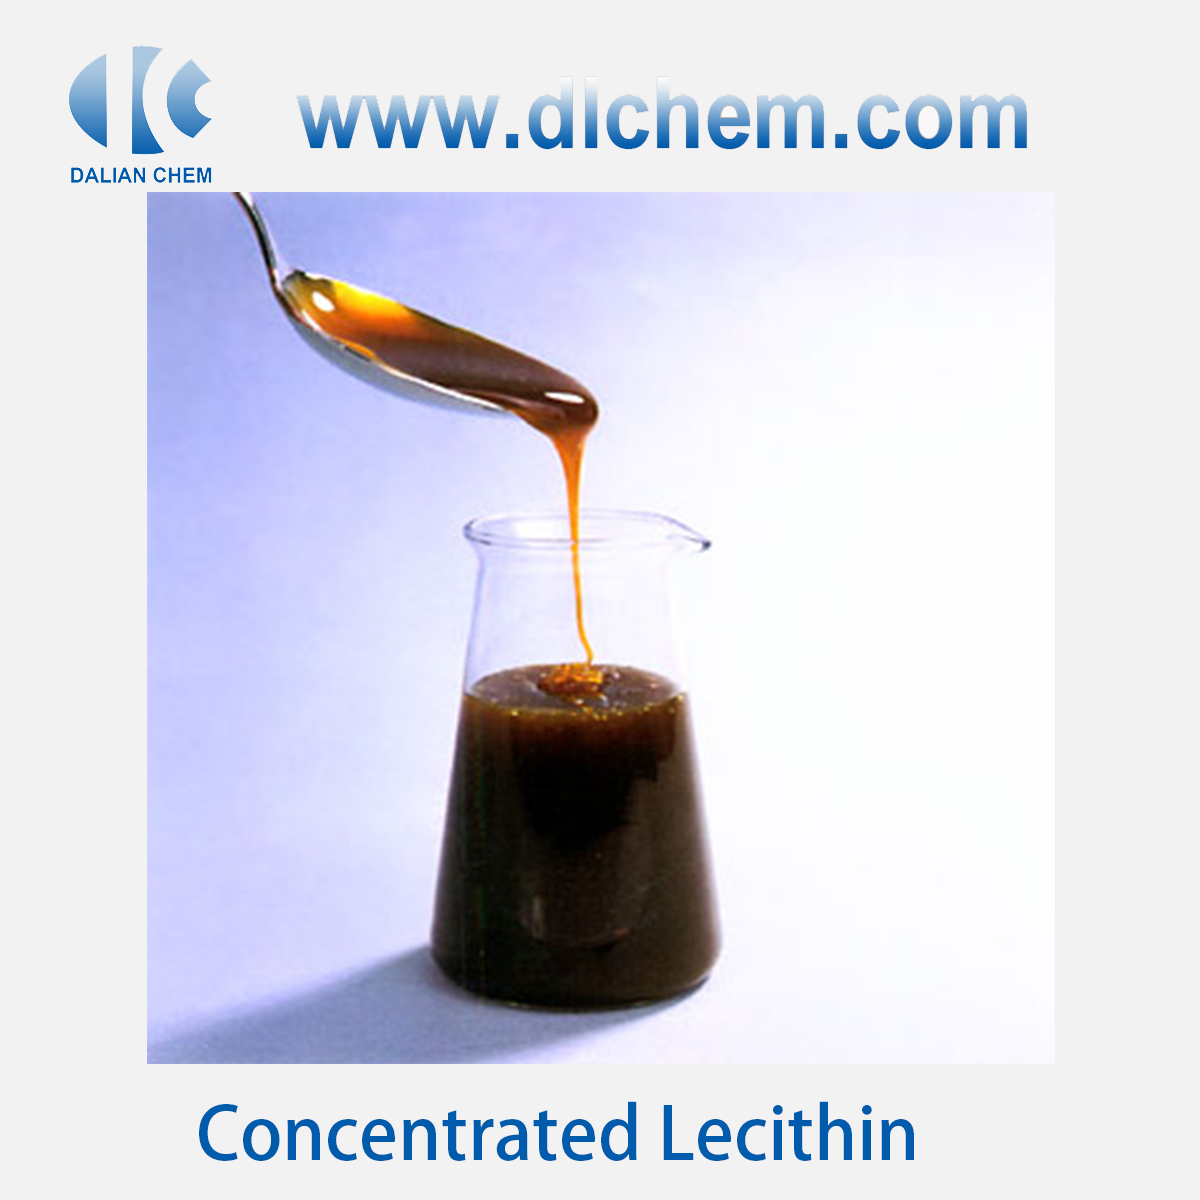 Concentrated Lecithin